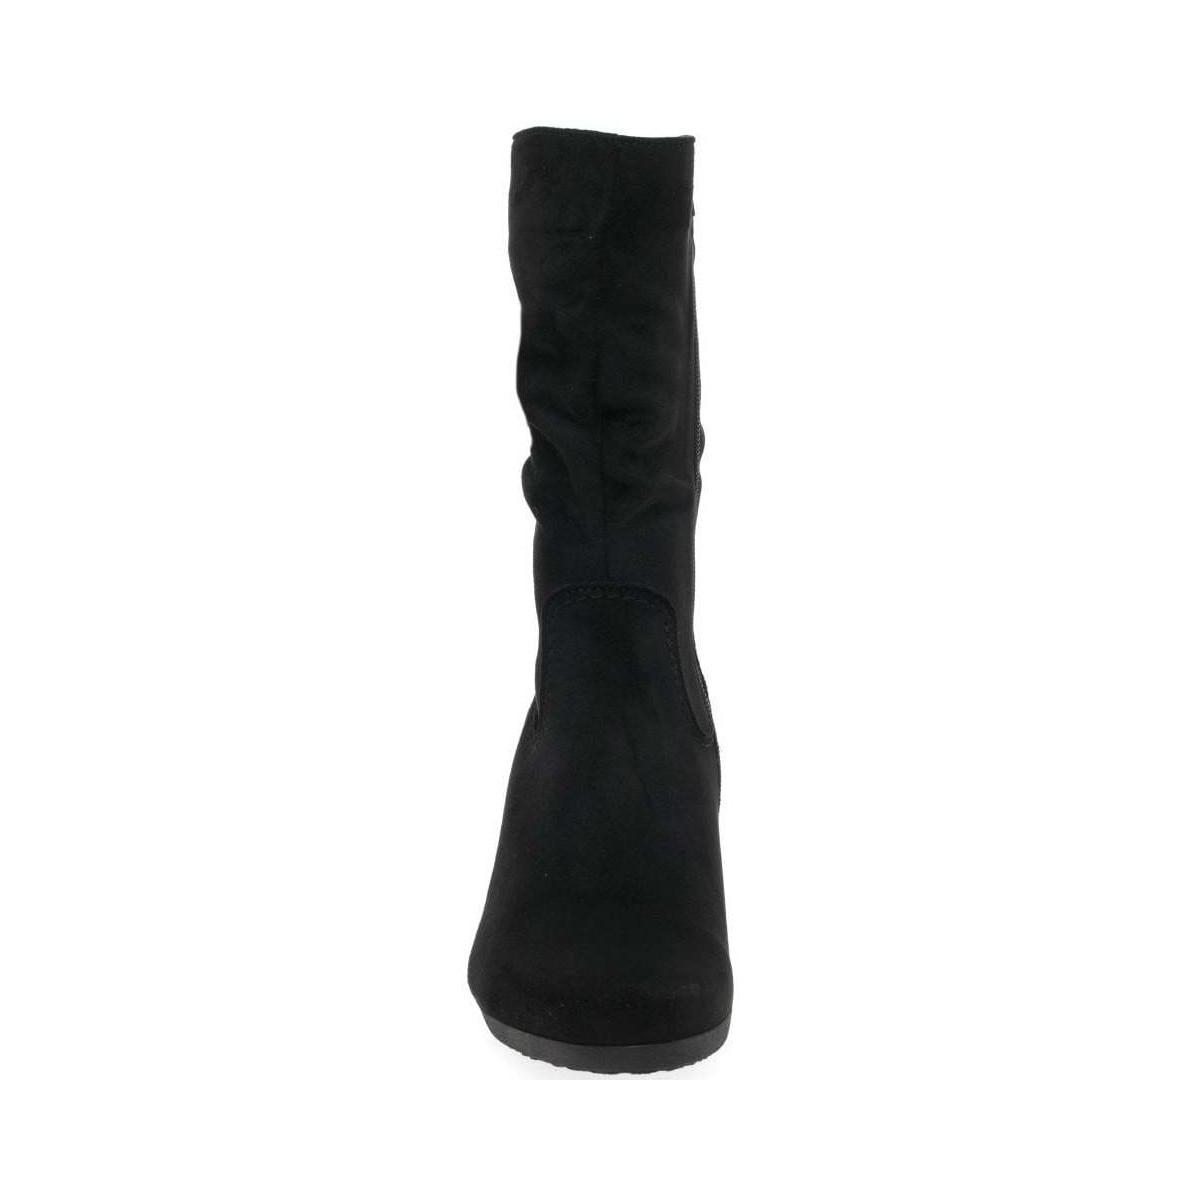 suede boots calf length